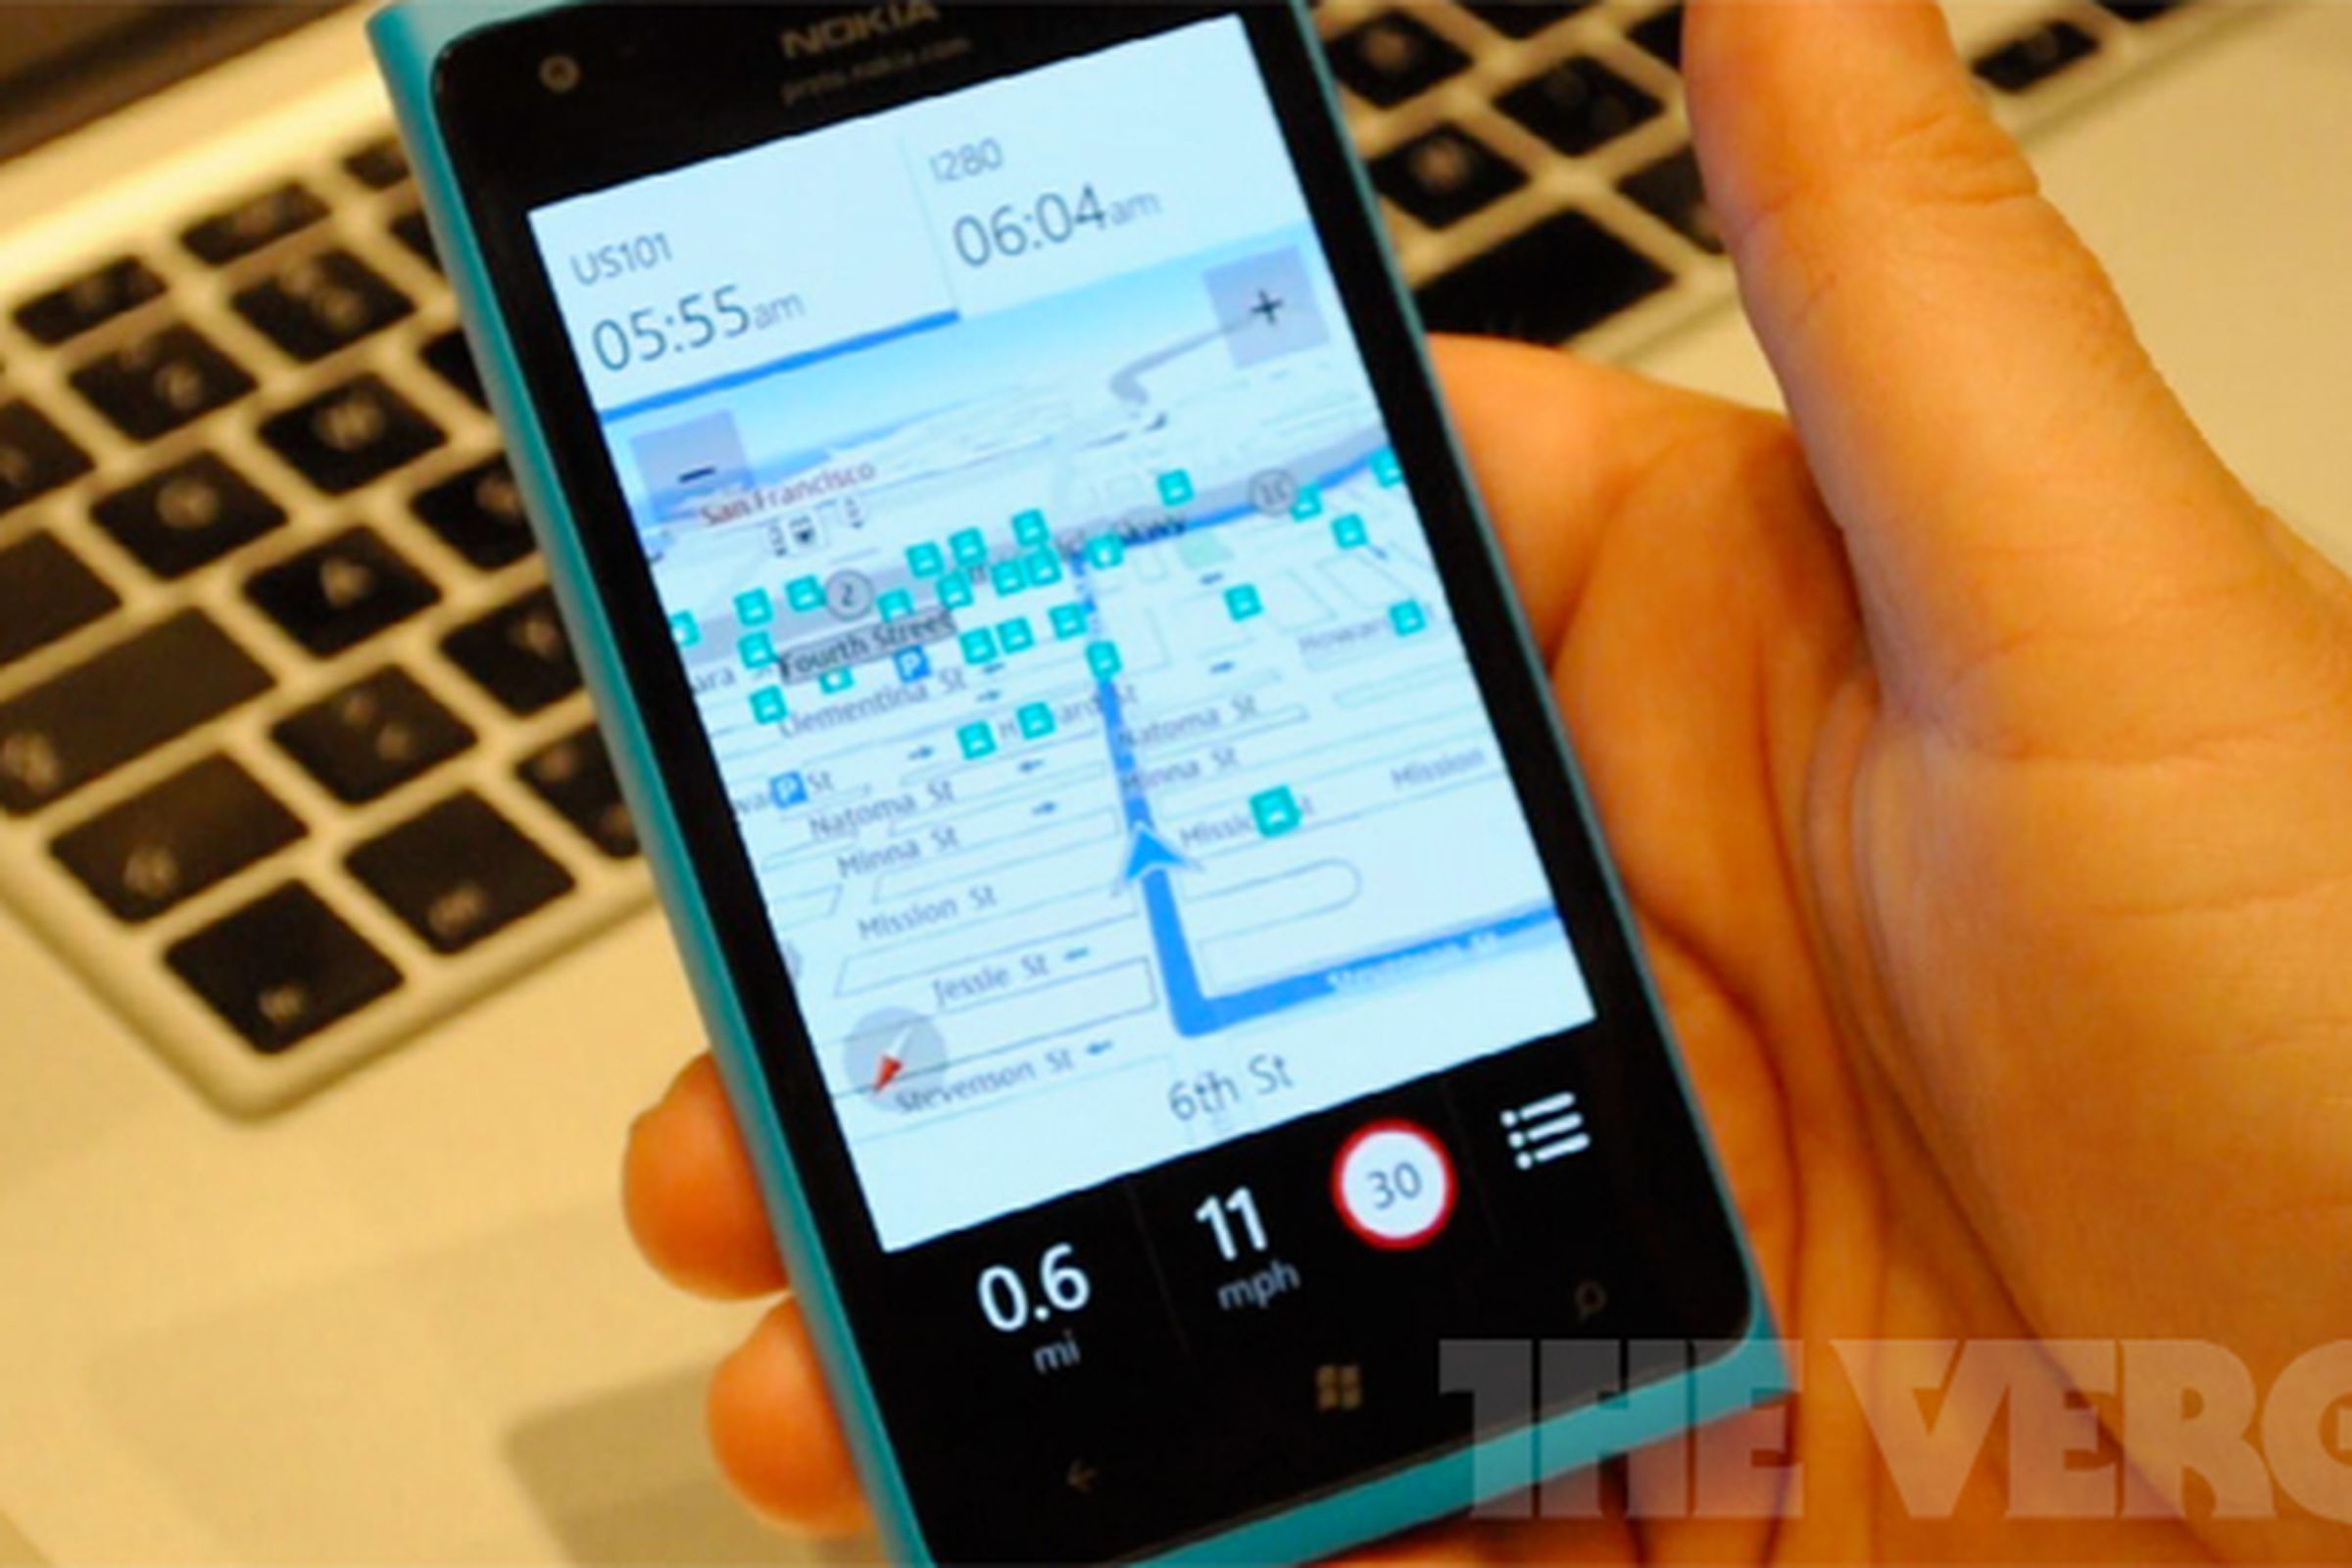 Nokia Drive 3.0 hands-on